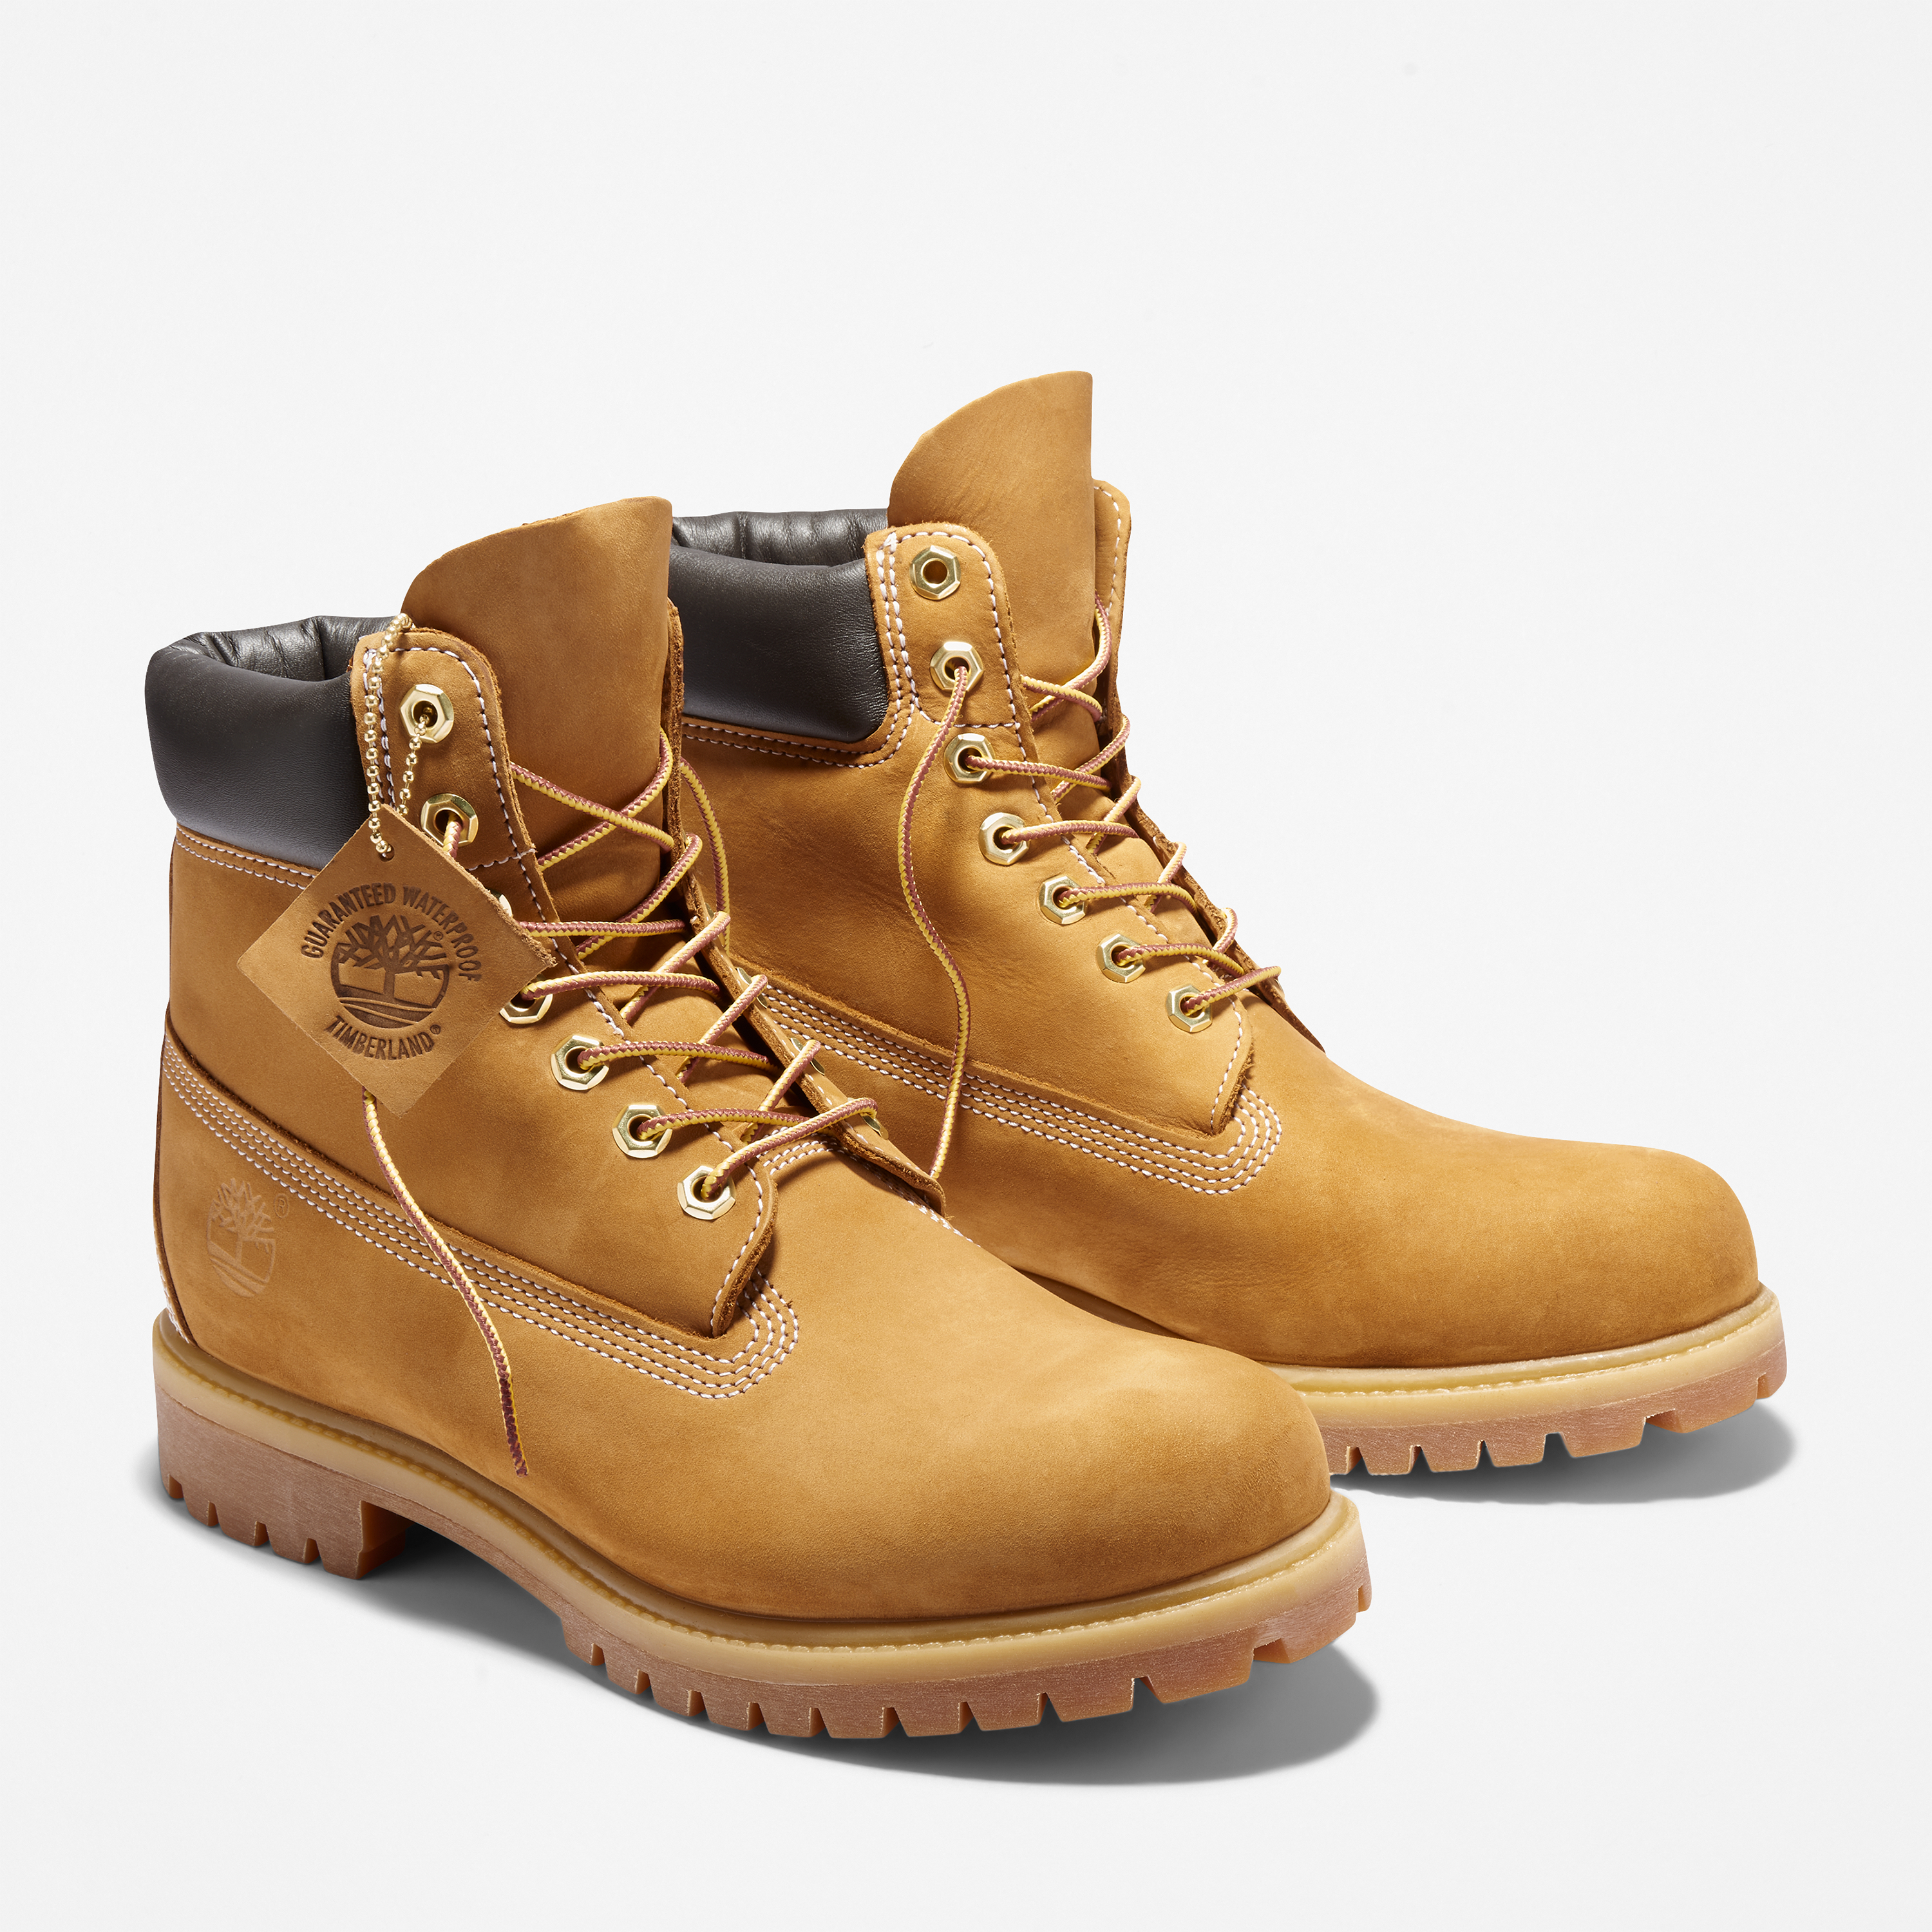 Timberland Marks Five Decades of the Original Timberland® Boot With Launch  of Future73 | Business Wire